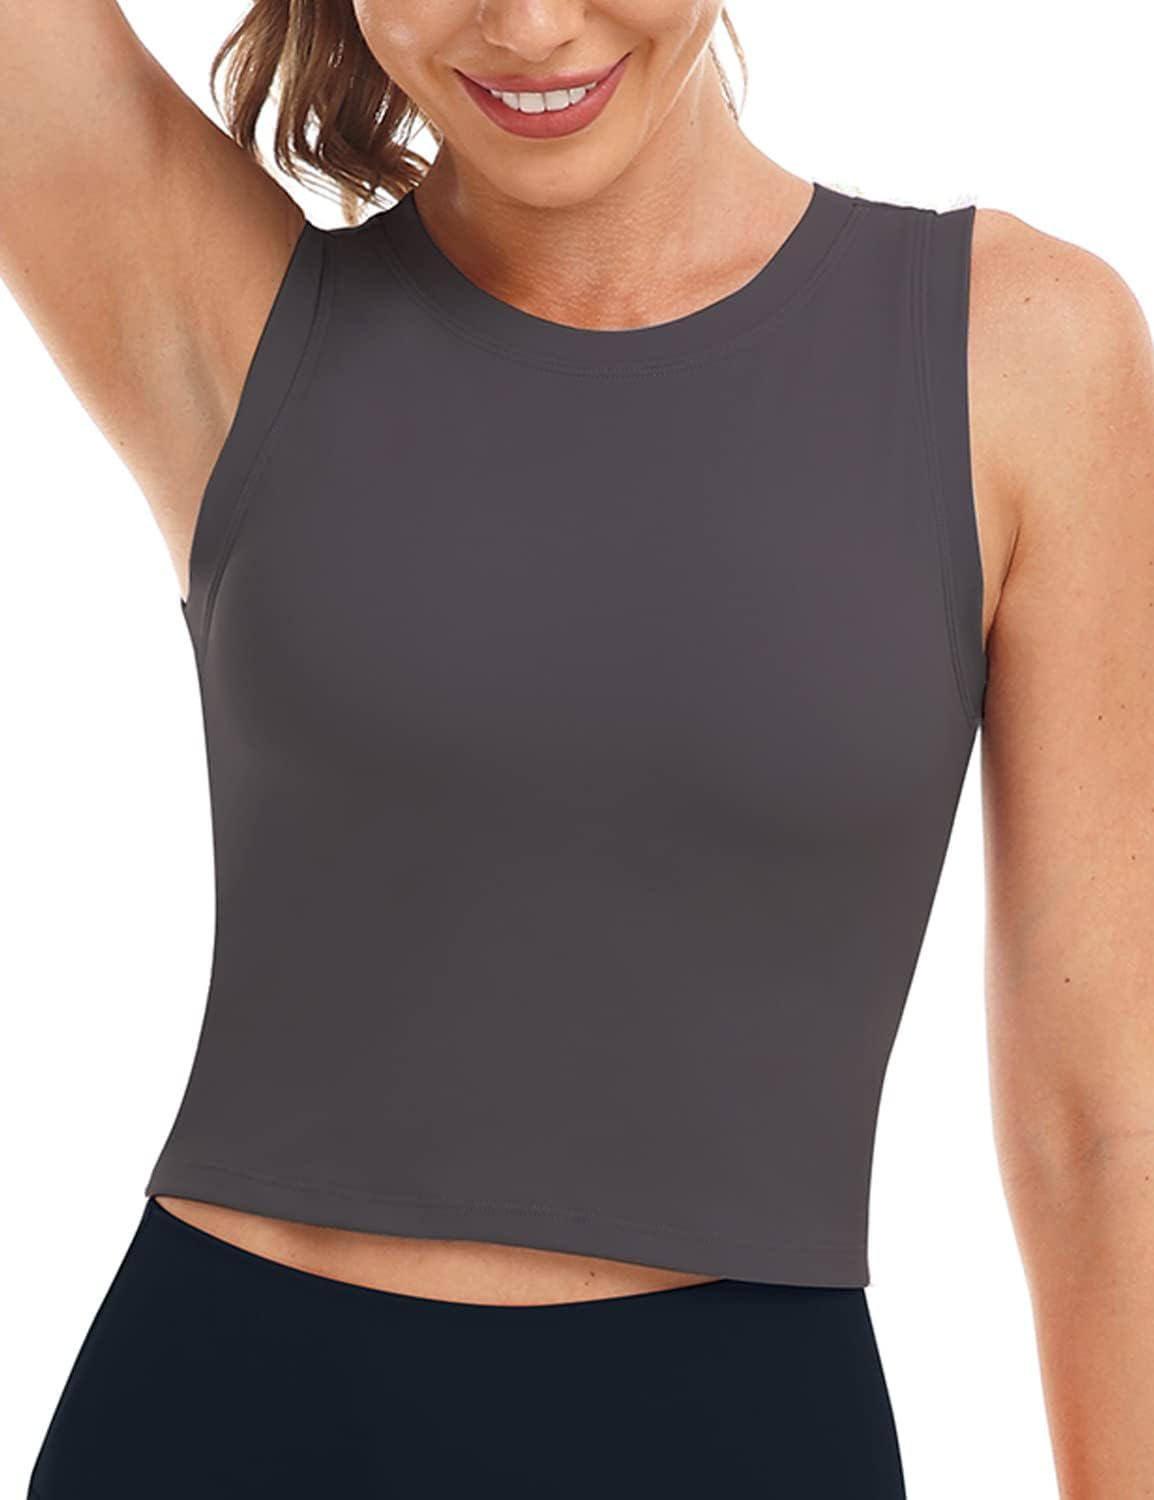 HeyNuts Wherever Crop Top for Women Workout Wirefree Padded Sports